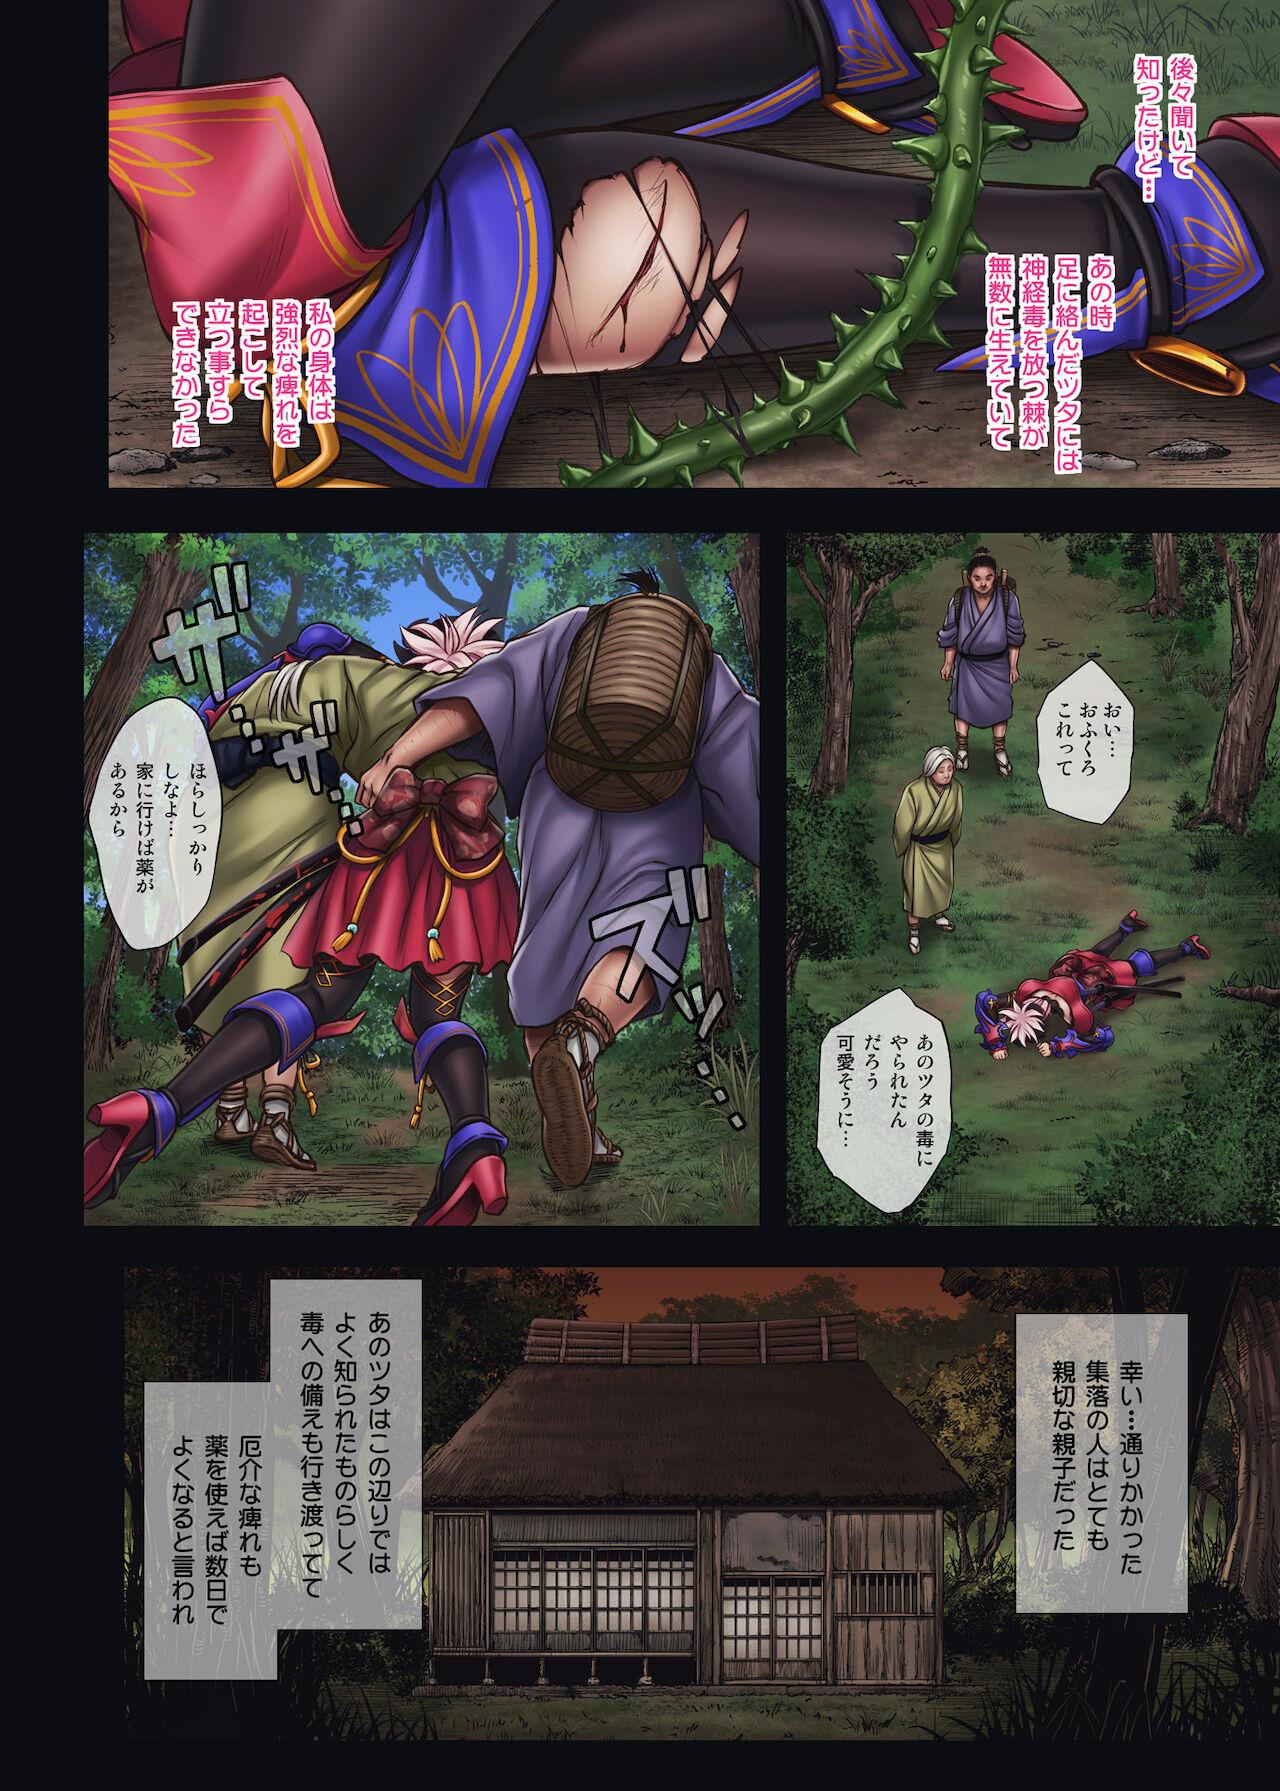 Tribbing Cyclone no Doujinshi Full Color Pack 4 - Fate grand order Sextoys - Page 7